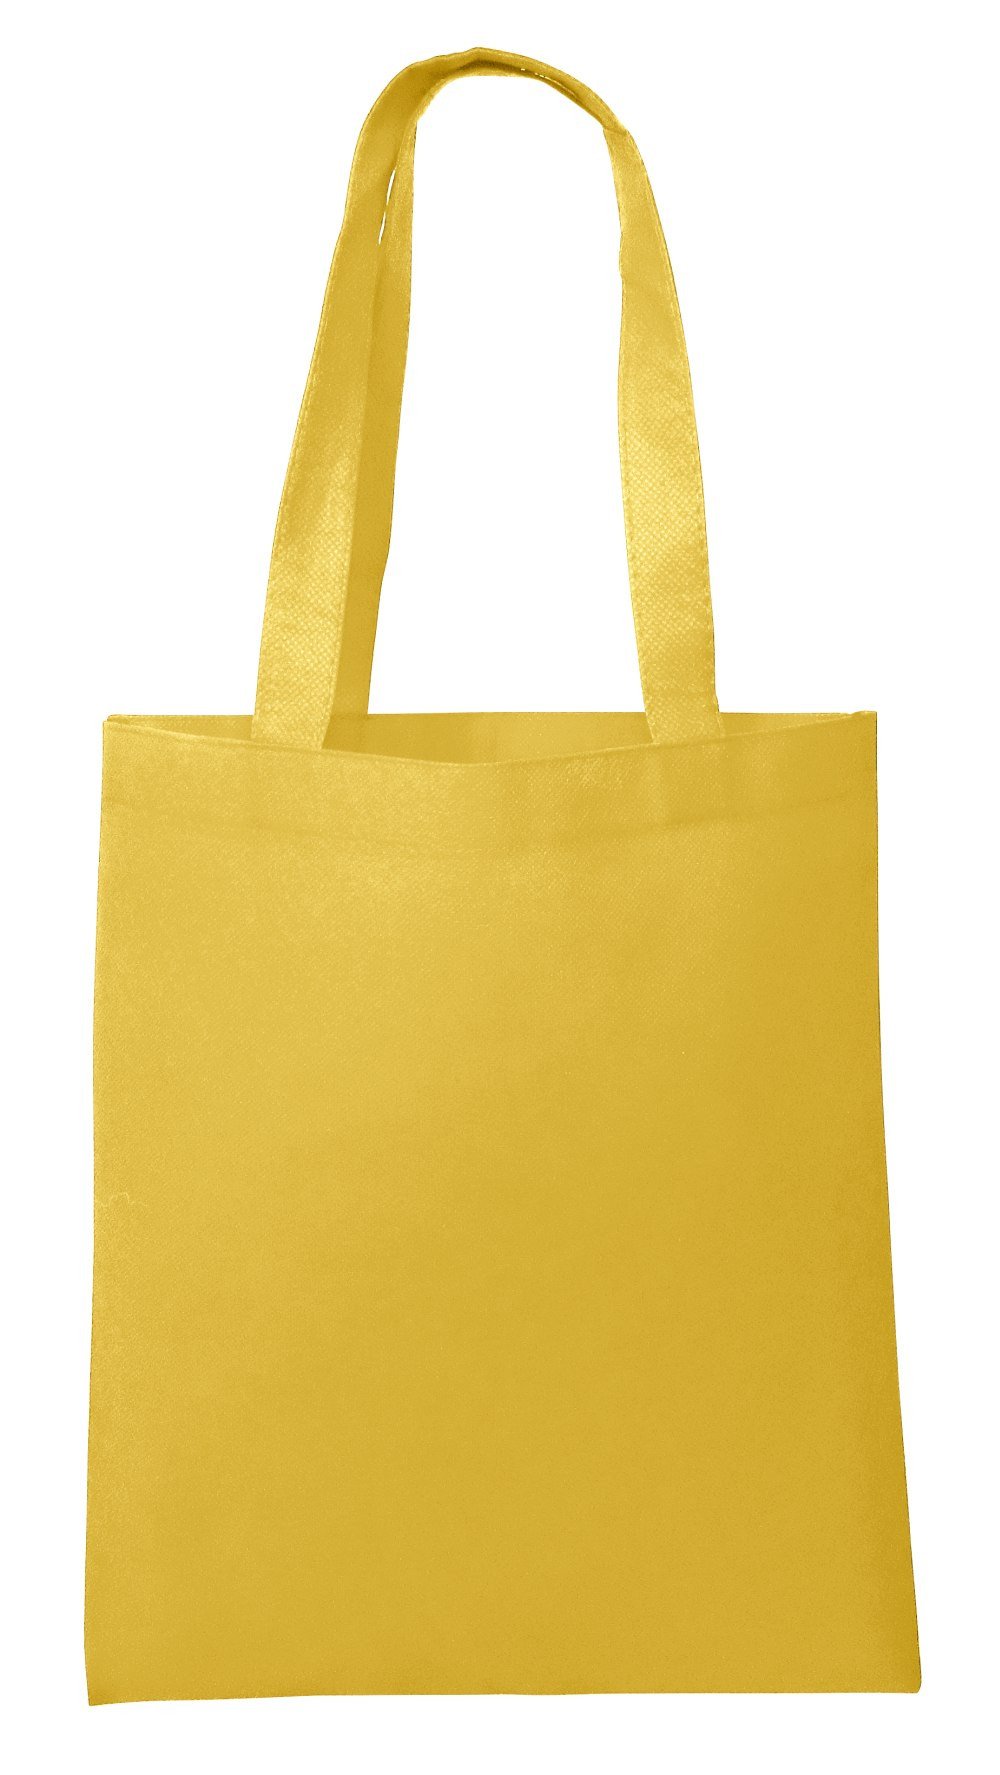 Cheap Promotional Tote Bags yellow